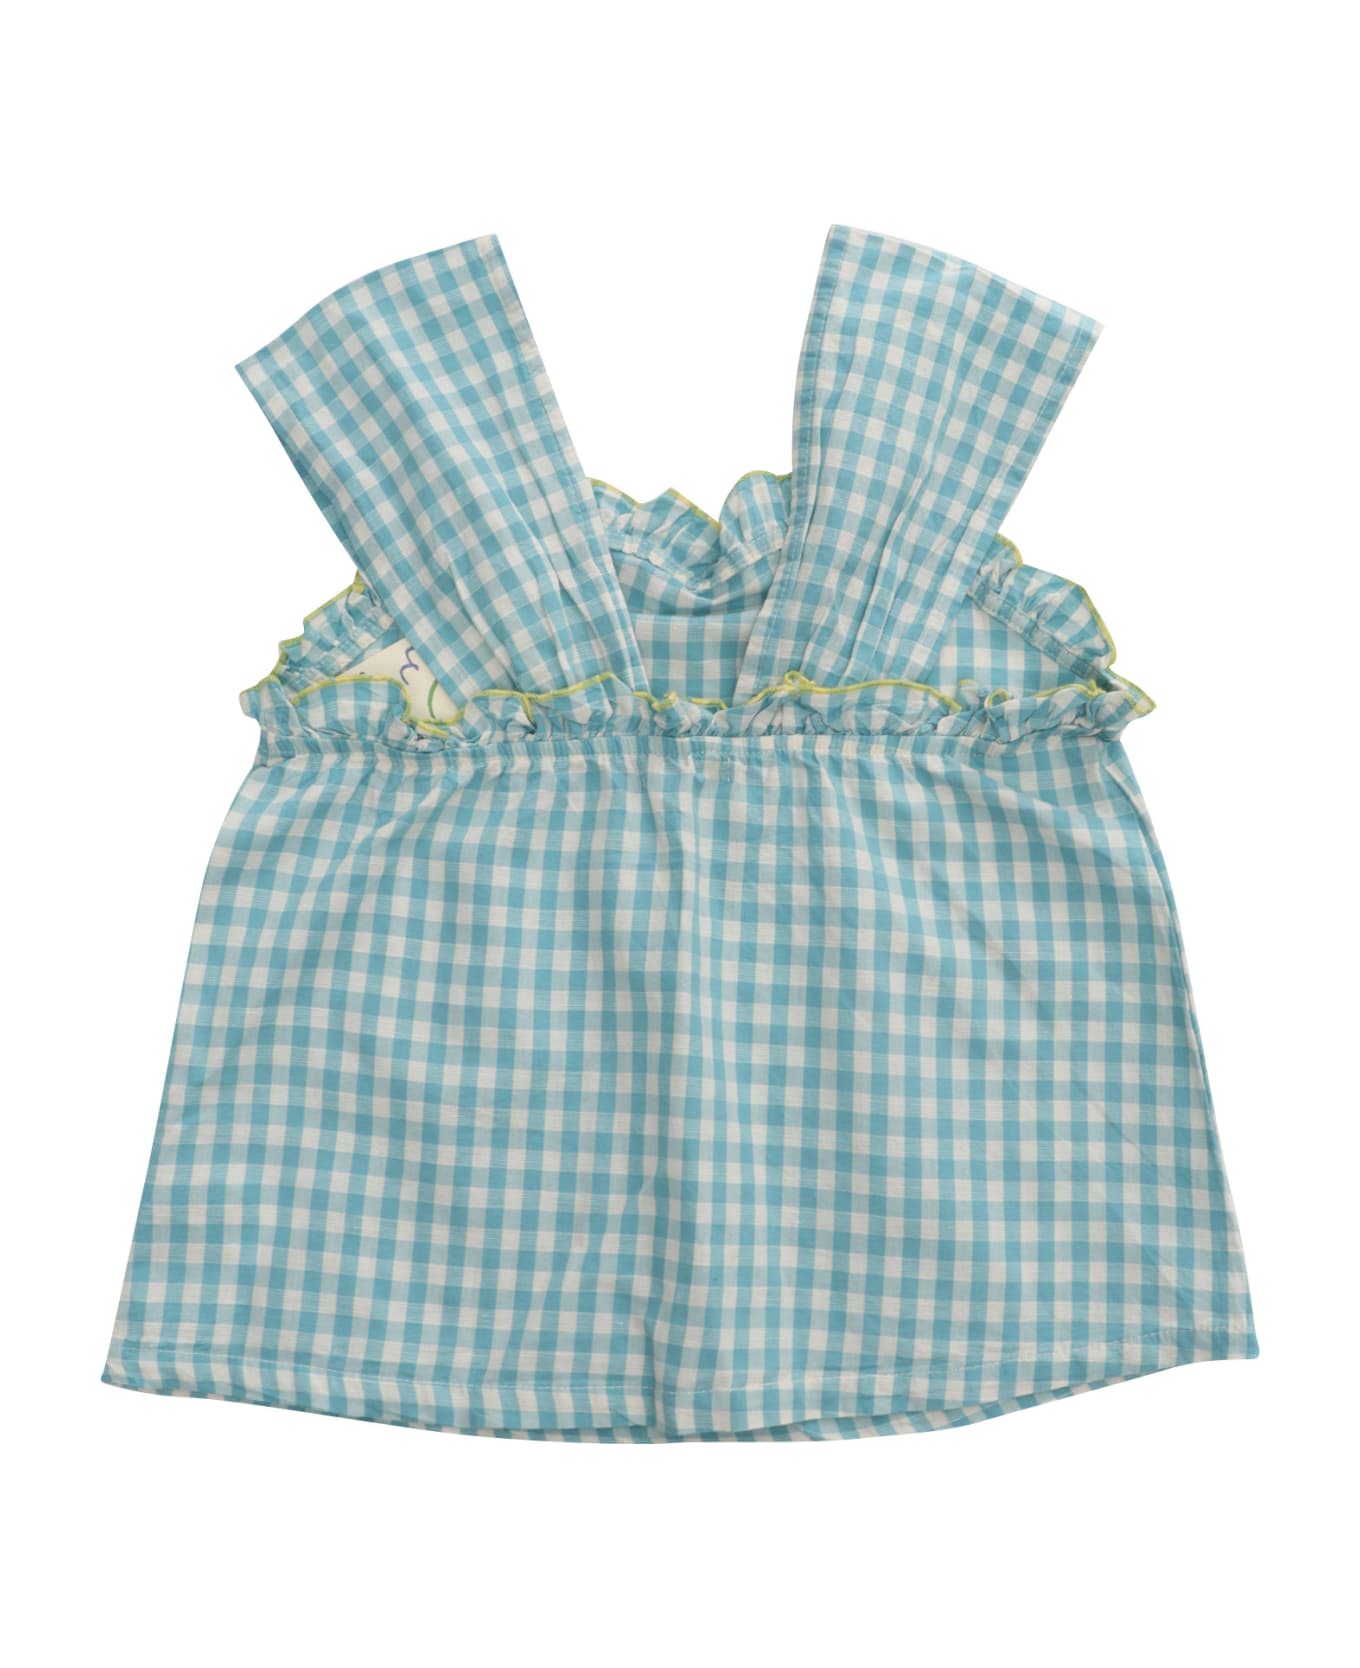 Bobo Choses Checked Patterned Top - LIGHT BLUE